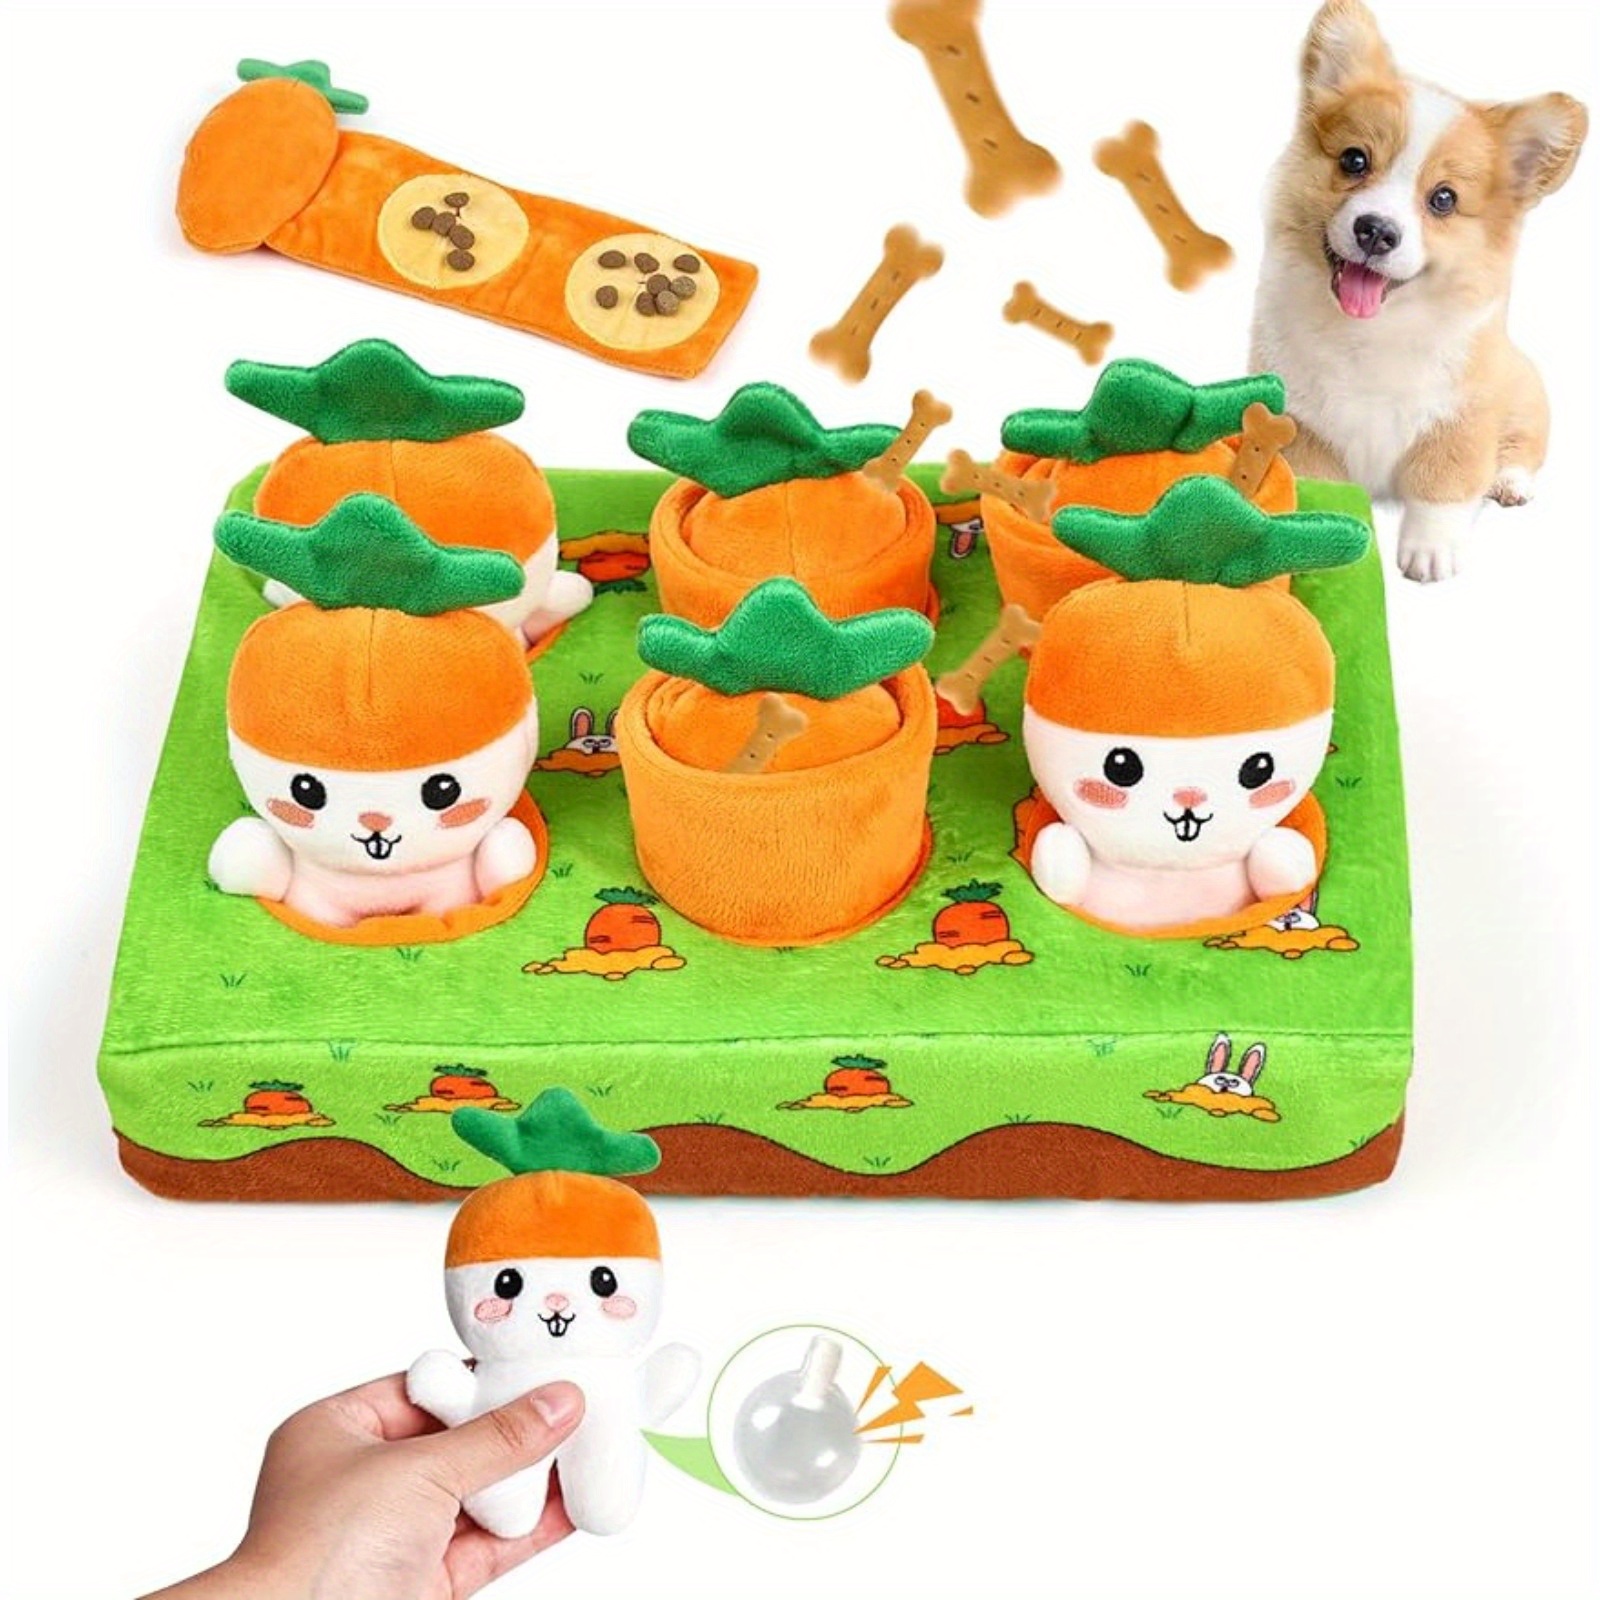 Hide and Seek Carrot, Interactive Dog Toys Feeding Sniff Mat Carrot Plush Toy, for Fun Carrots Harvest Toy Memory Games Training Dogs Puppy Strawberry